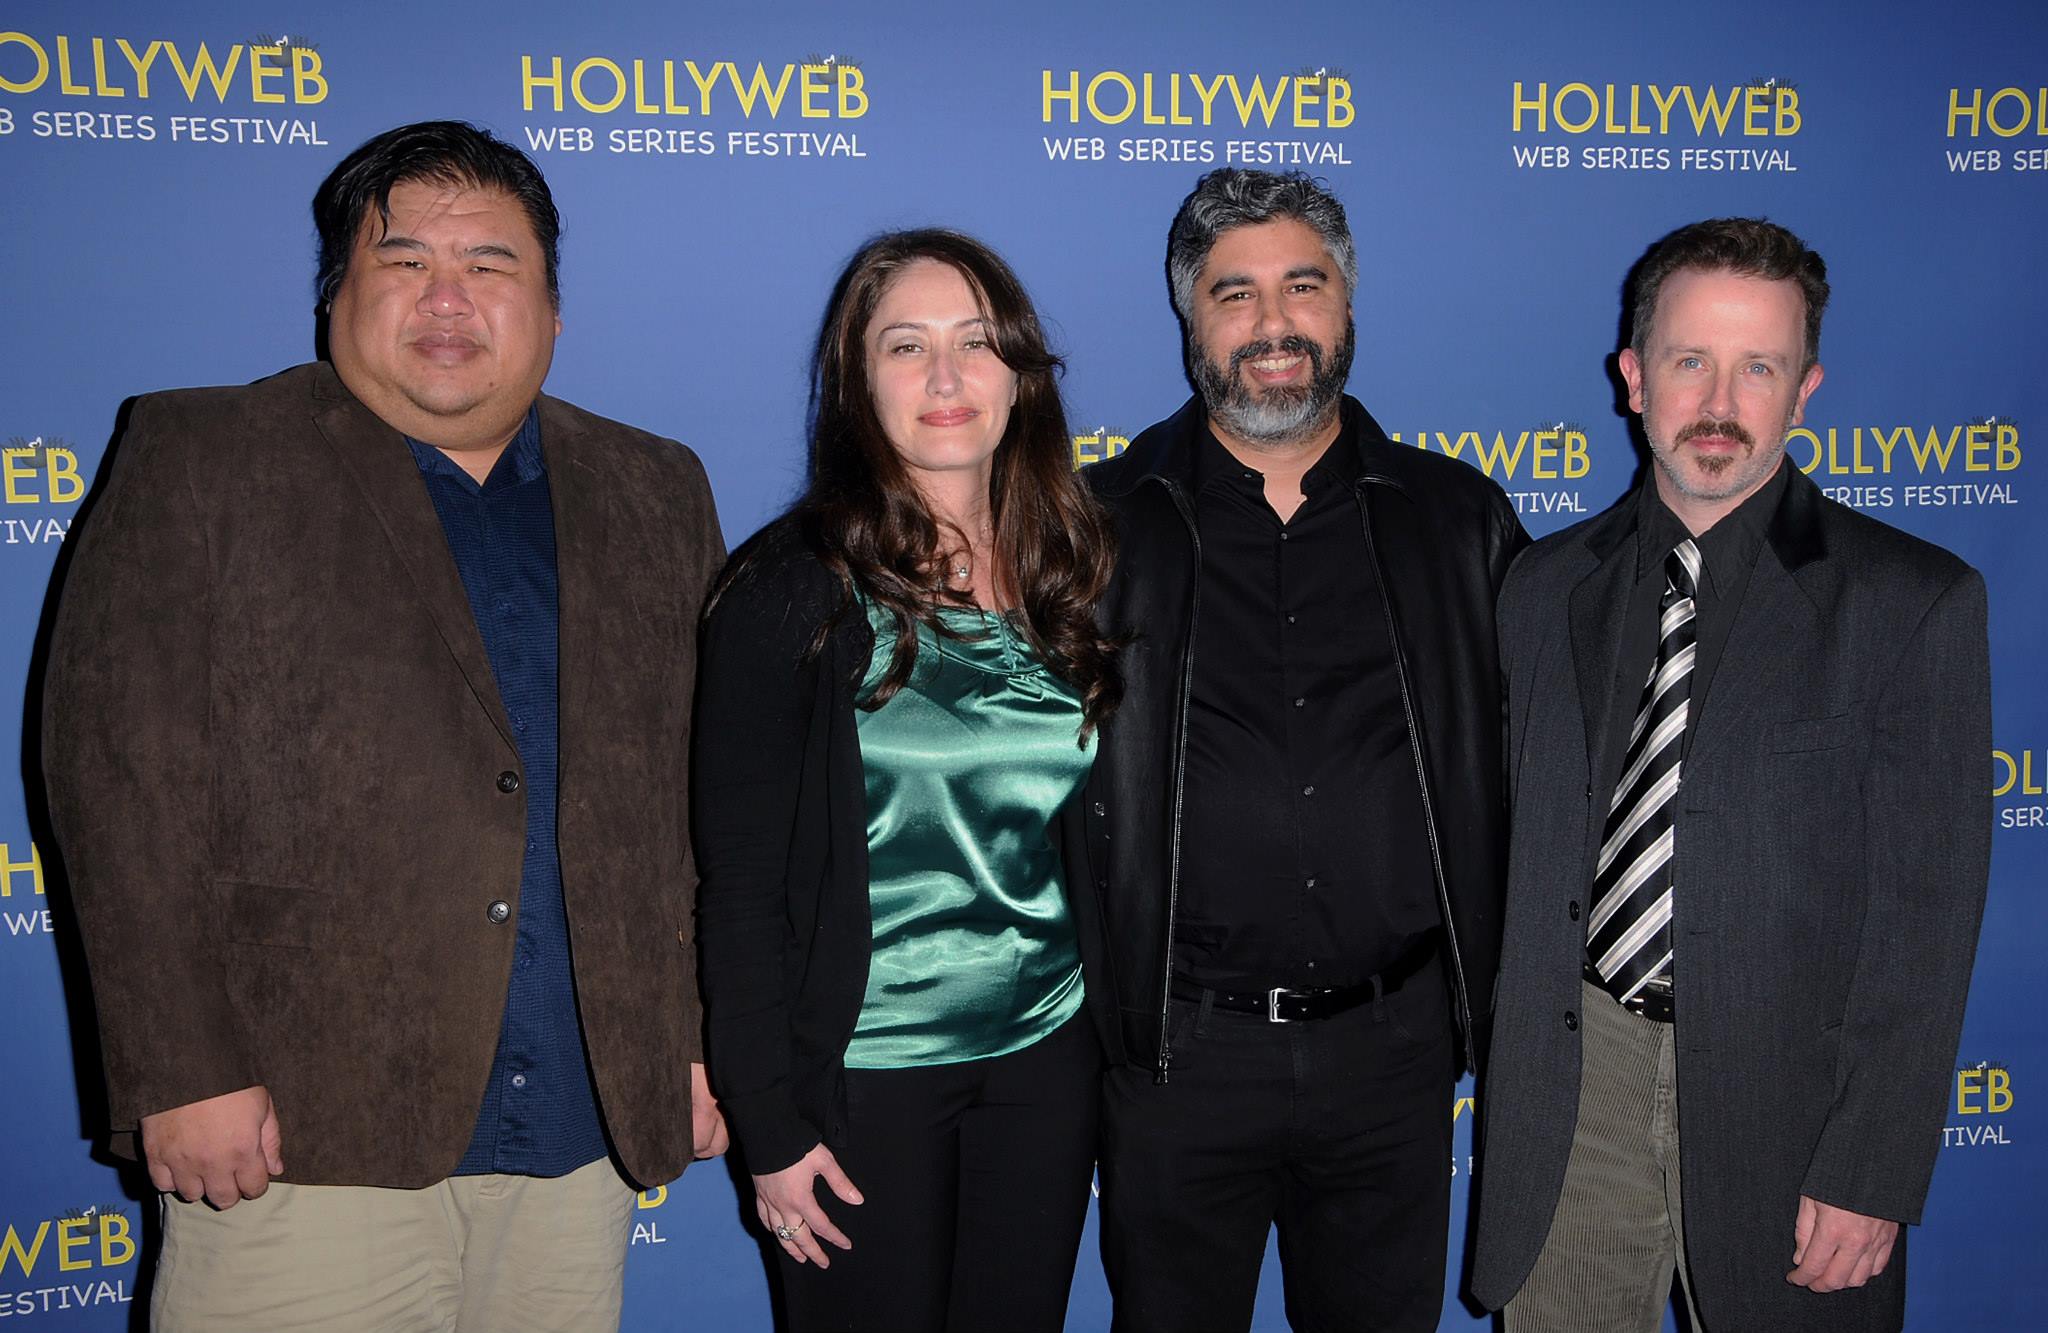 From the HollyWeb Festival 2014